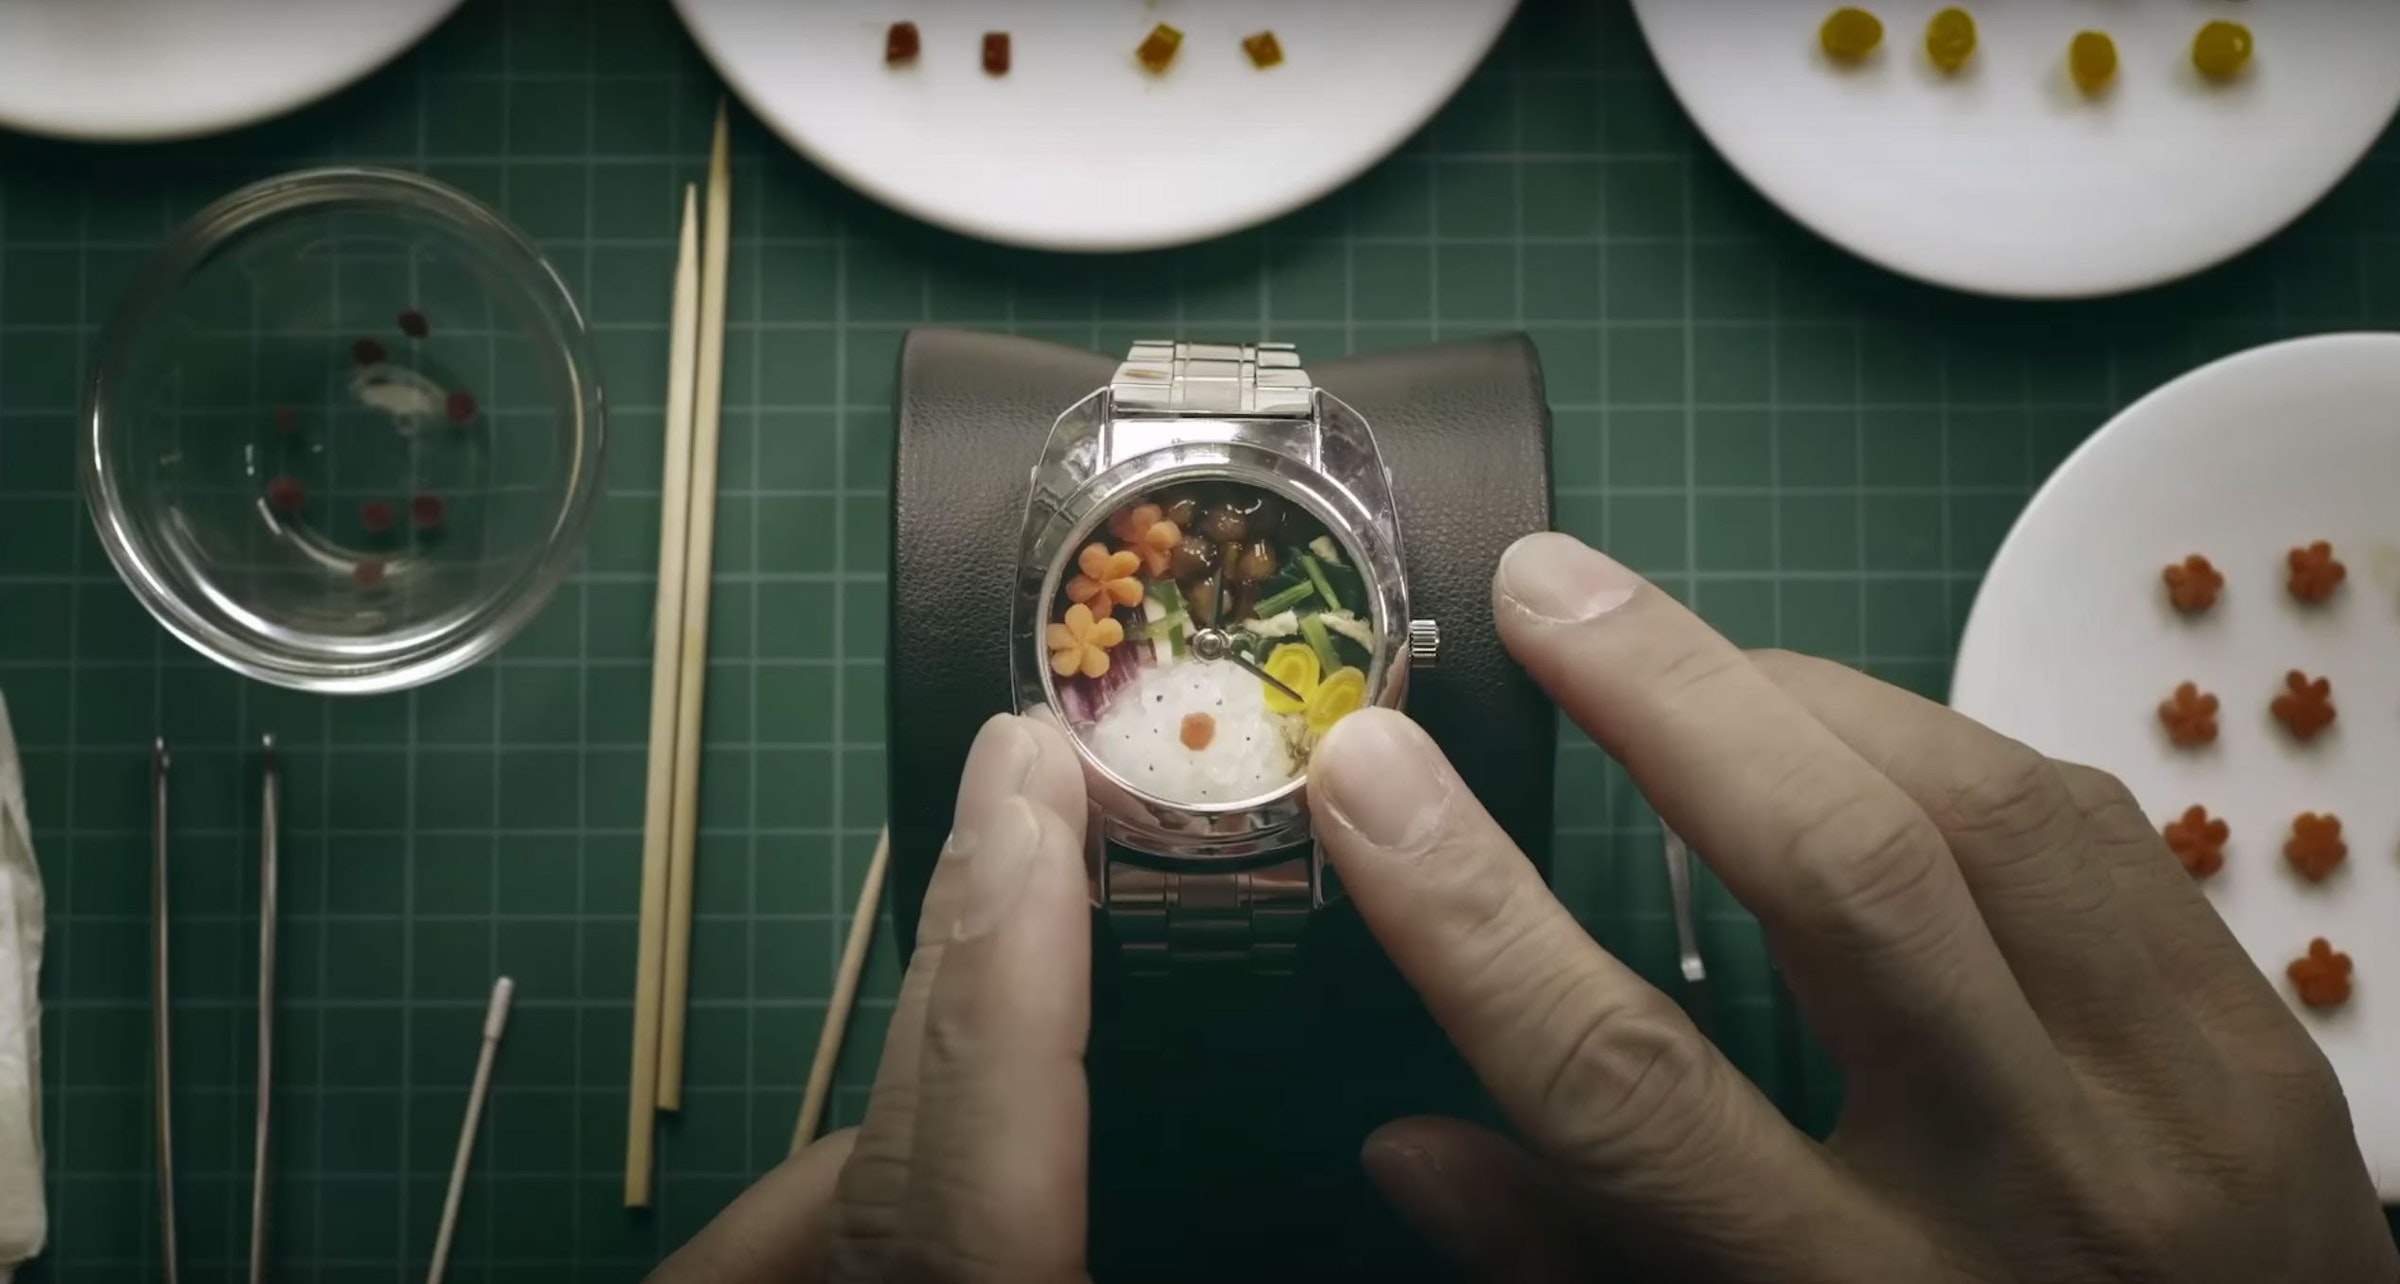 Bento, Watch, Eating, Food, Pebble, Meal, Lunch, Smartwatch, Lunchbox, Breakfast, 手錶 便當, finger, hand, nail